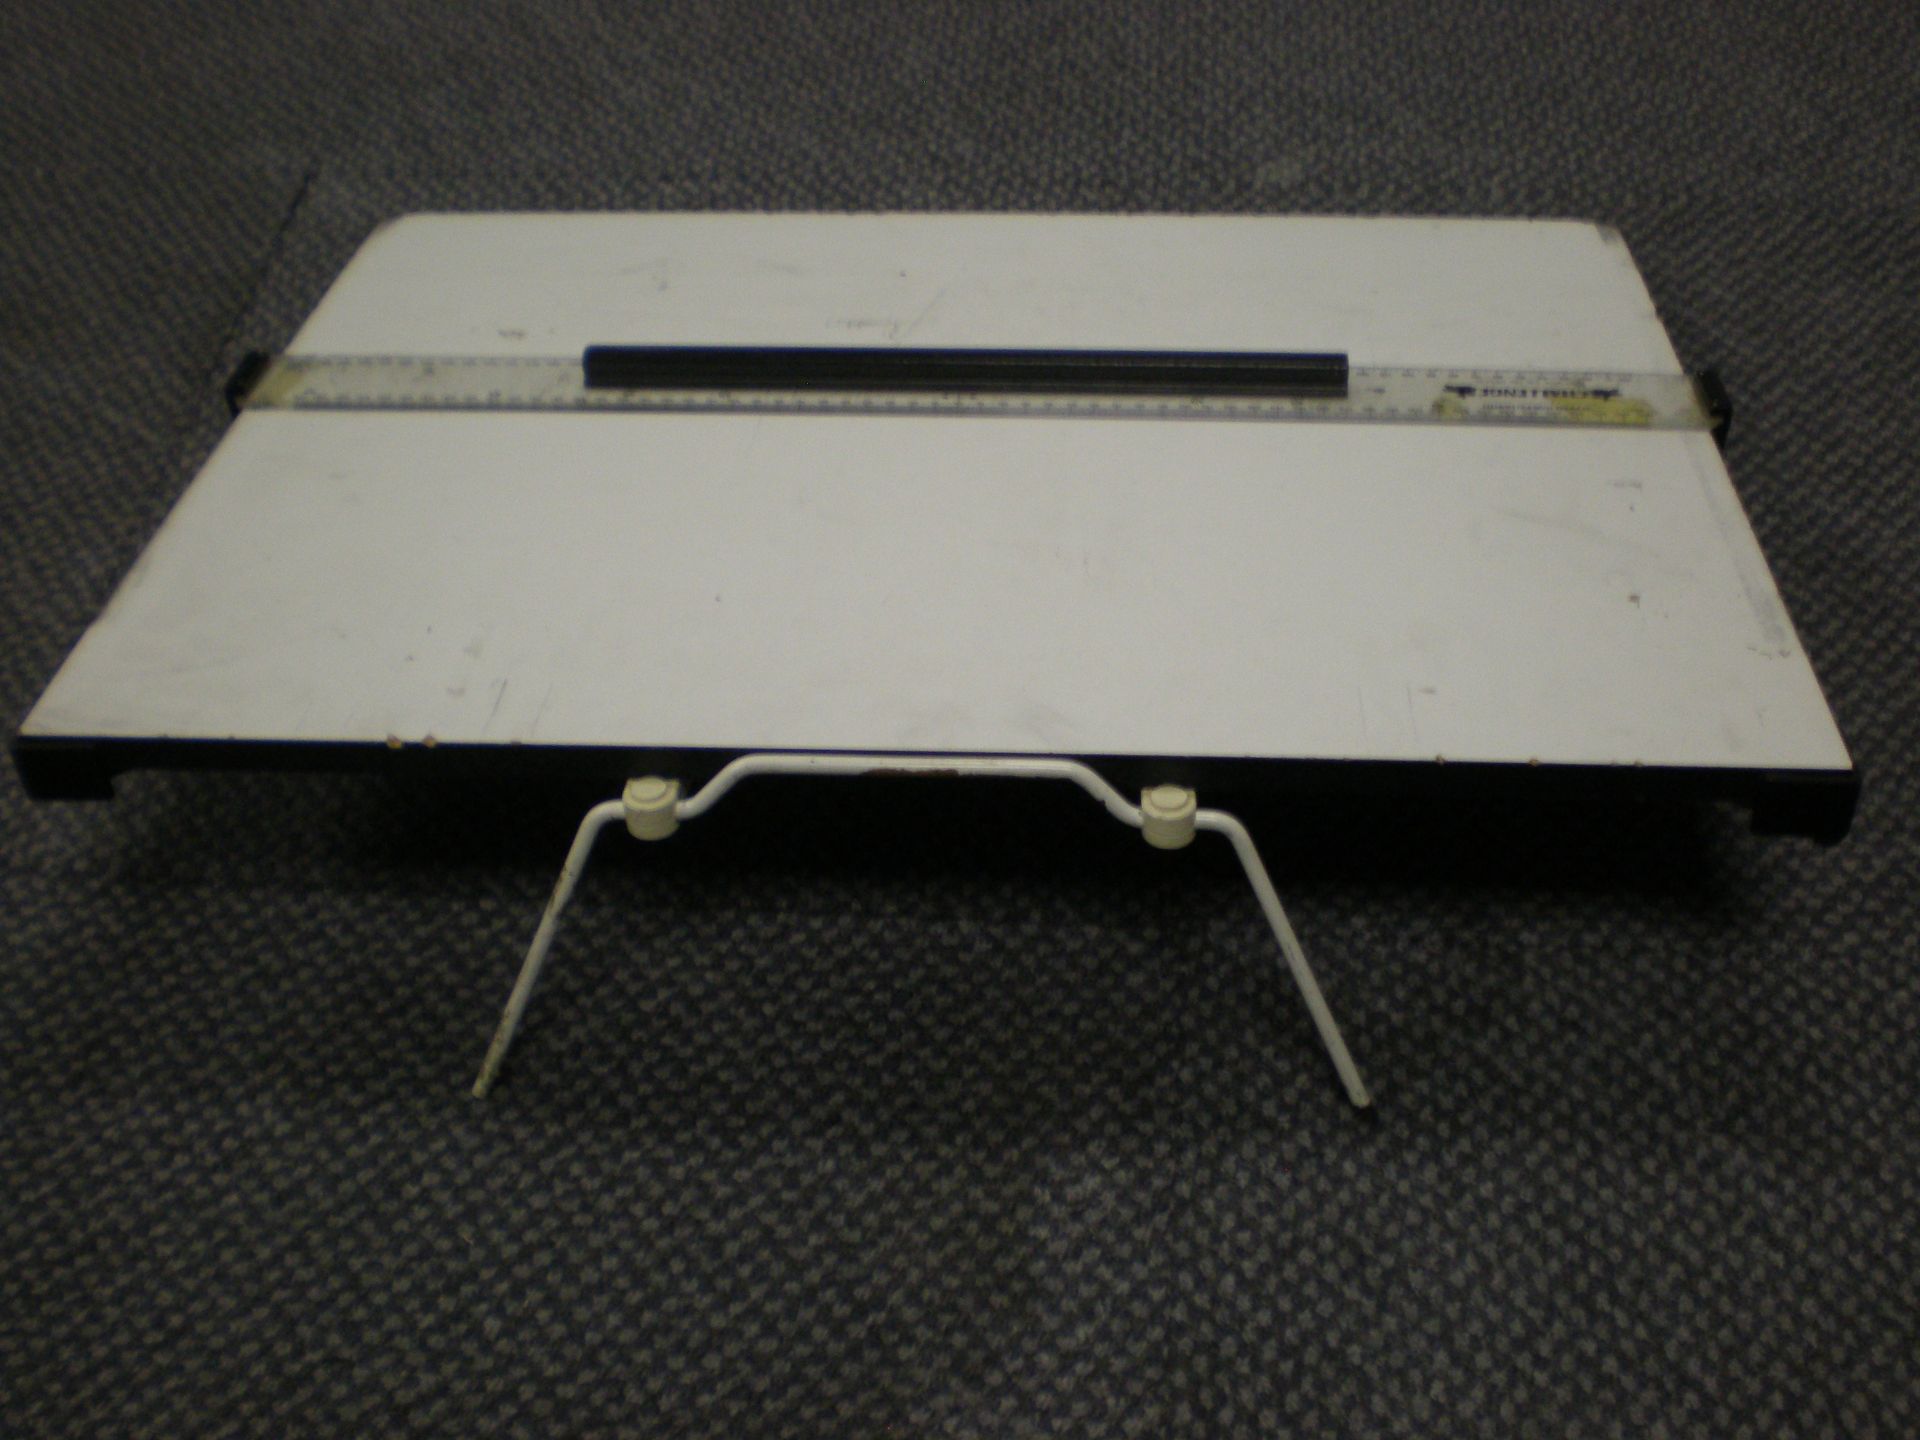 Set Of 23 Desktop Drawing Boards On Trolley With Wheels - Image 6 of 8